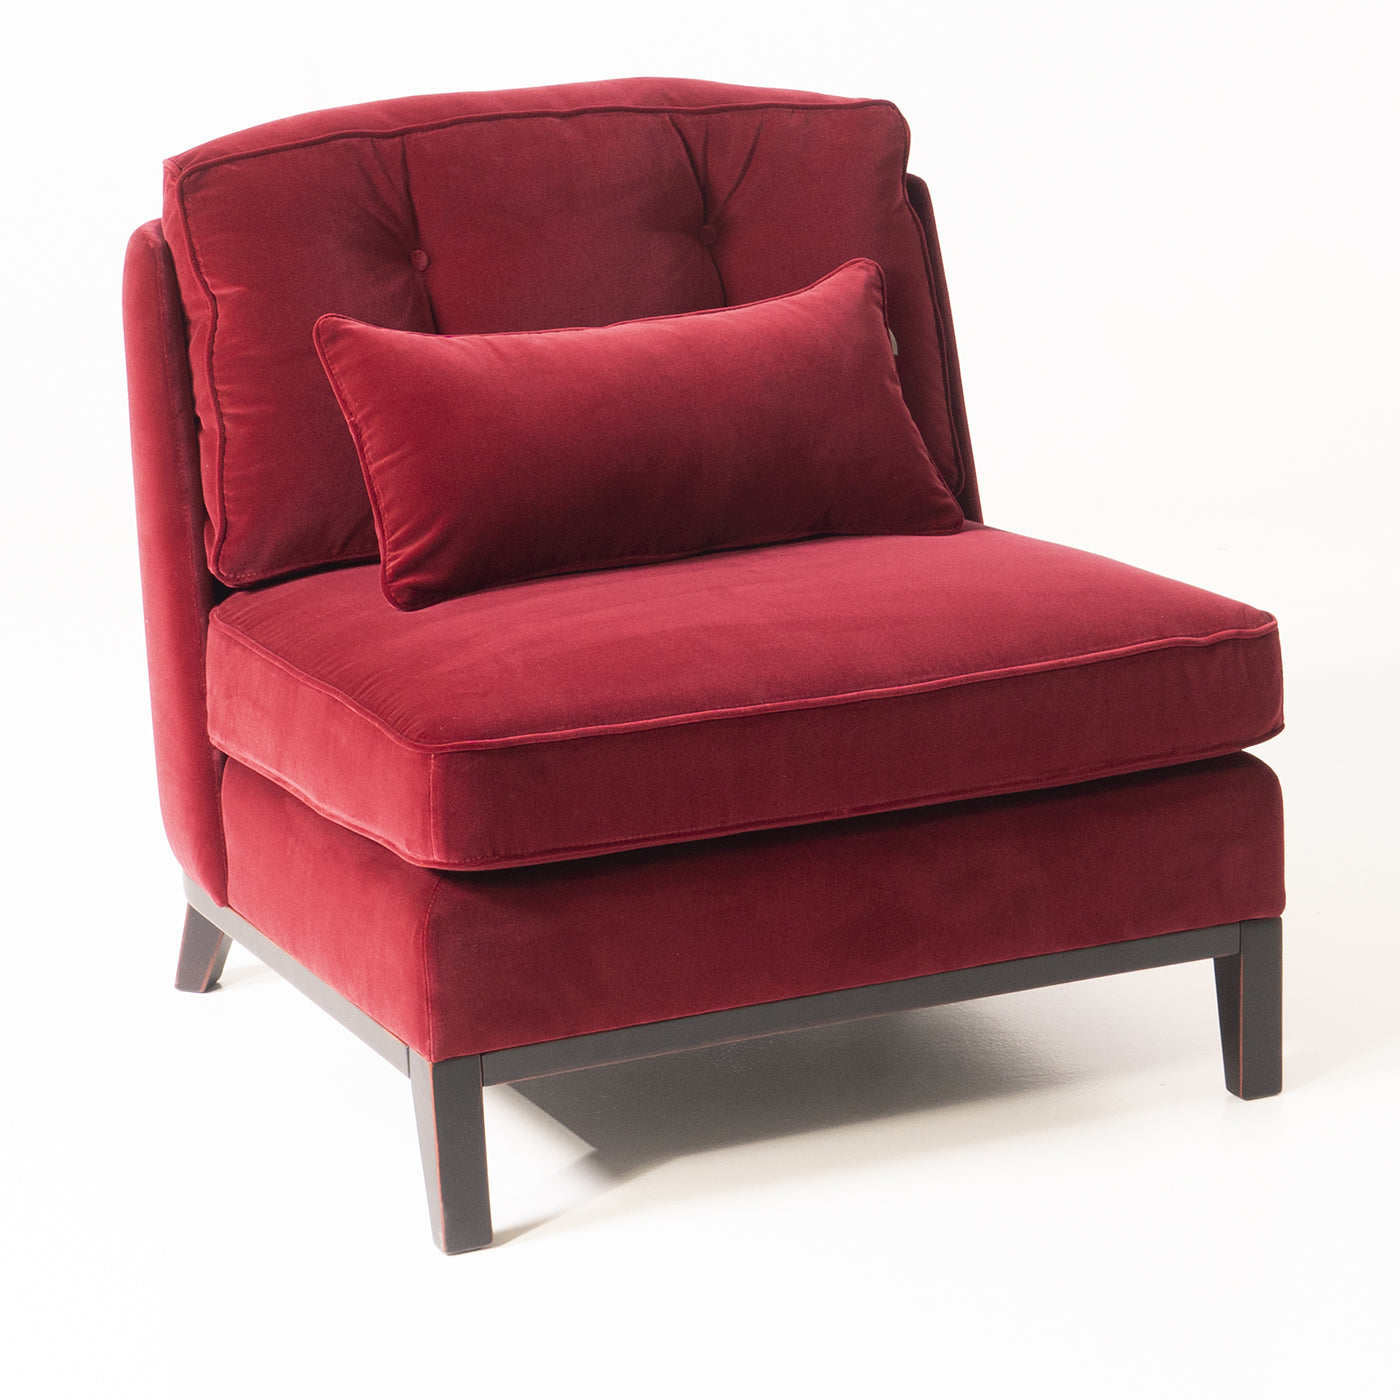 Altieri Red Armchair by Marco and Giulio Mantellassi  - Alternative view 3